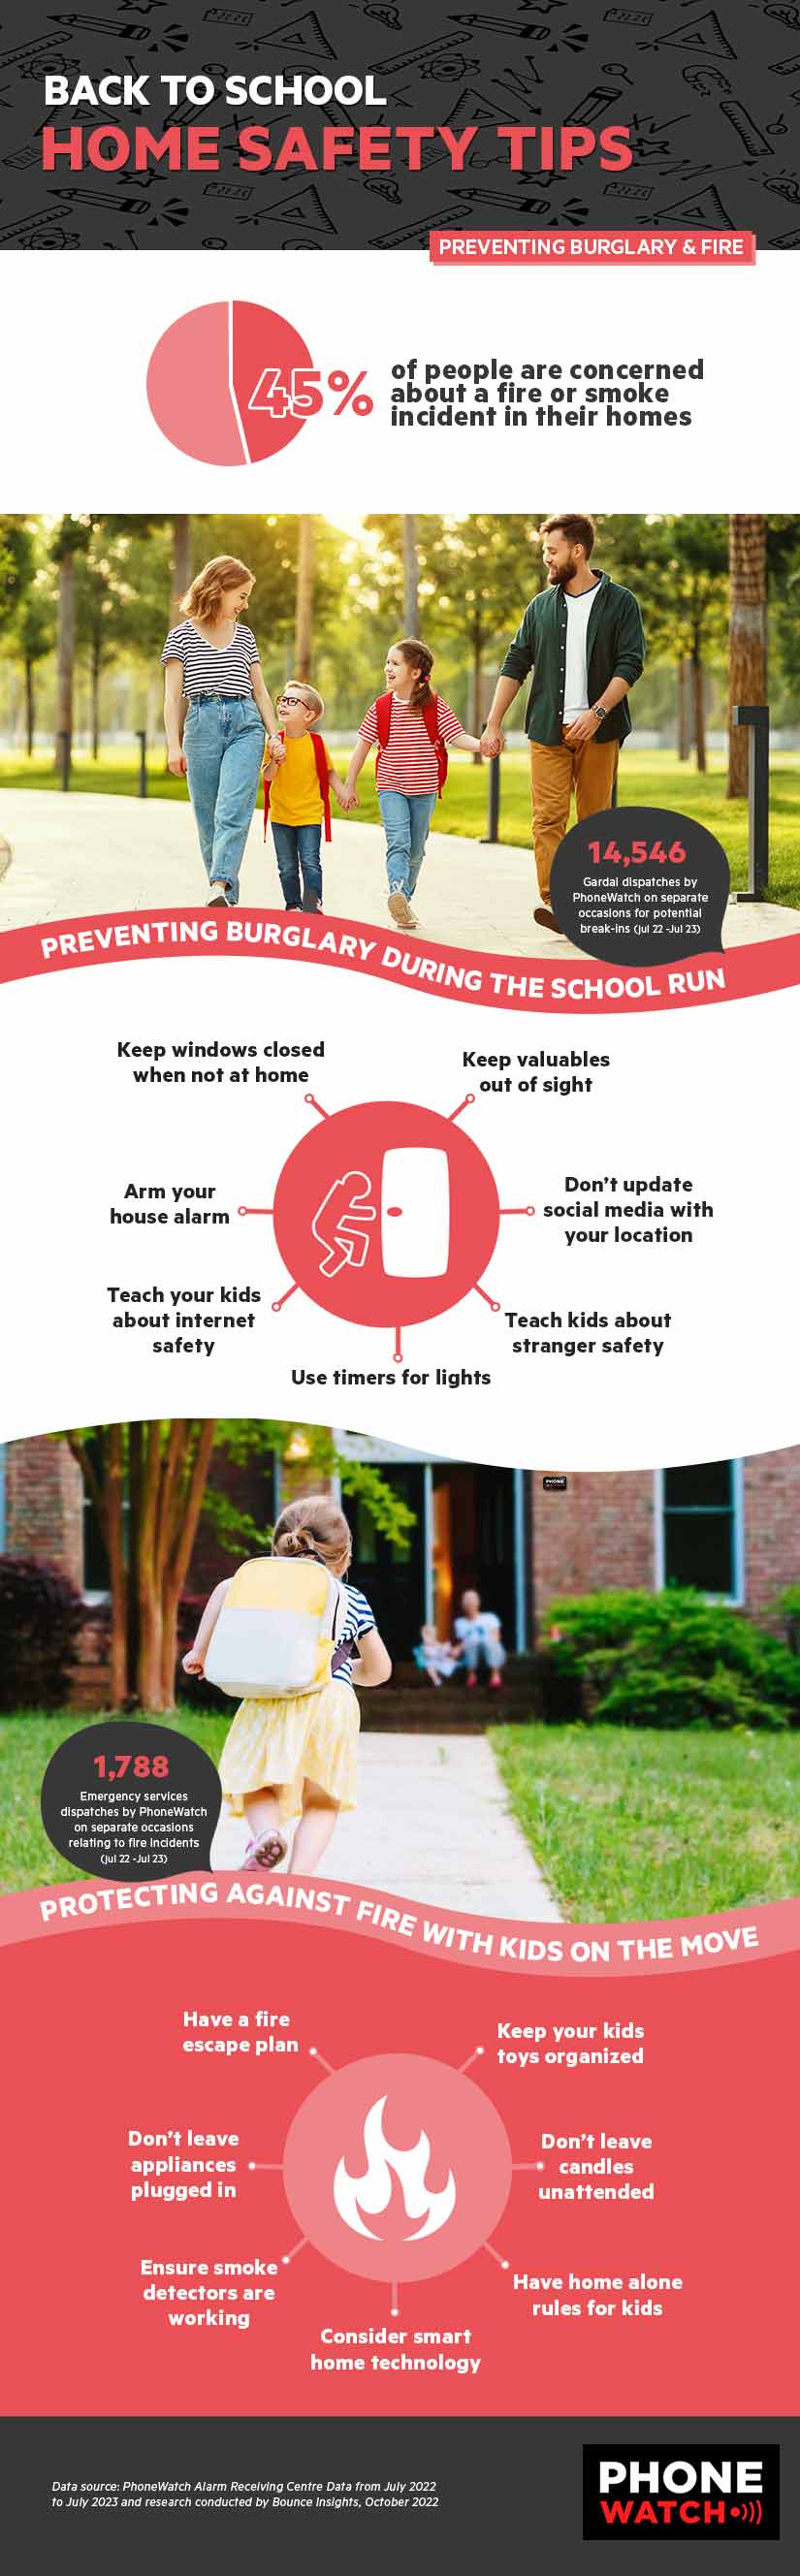 back-to-shool-home-safety-infographic